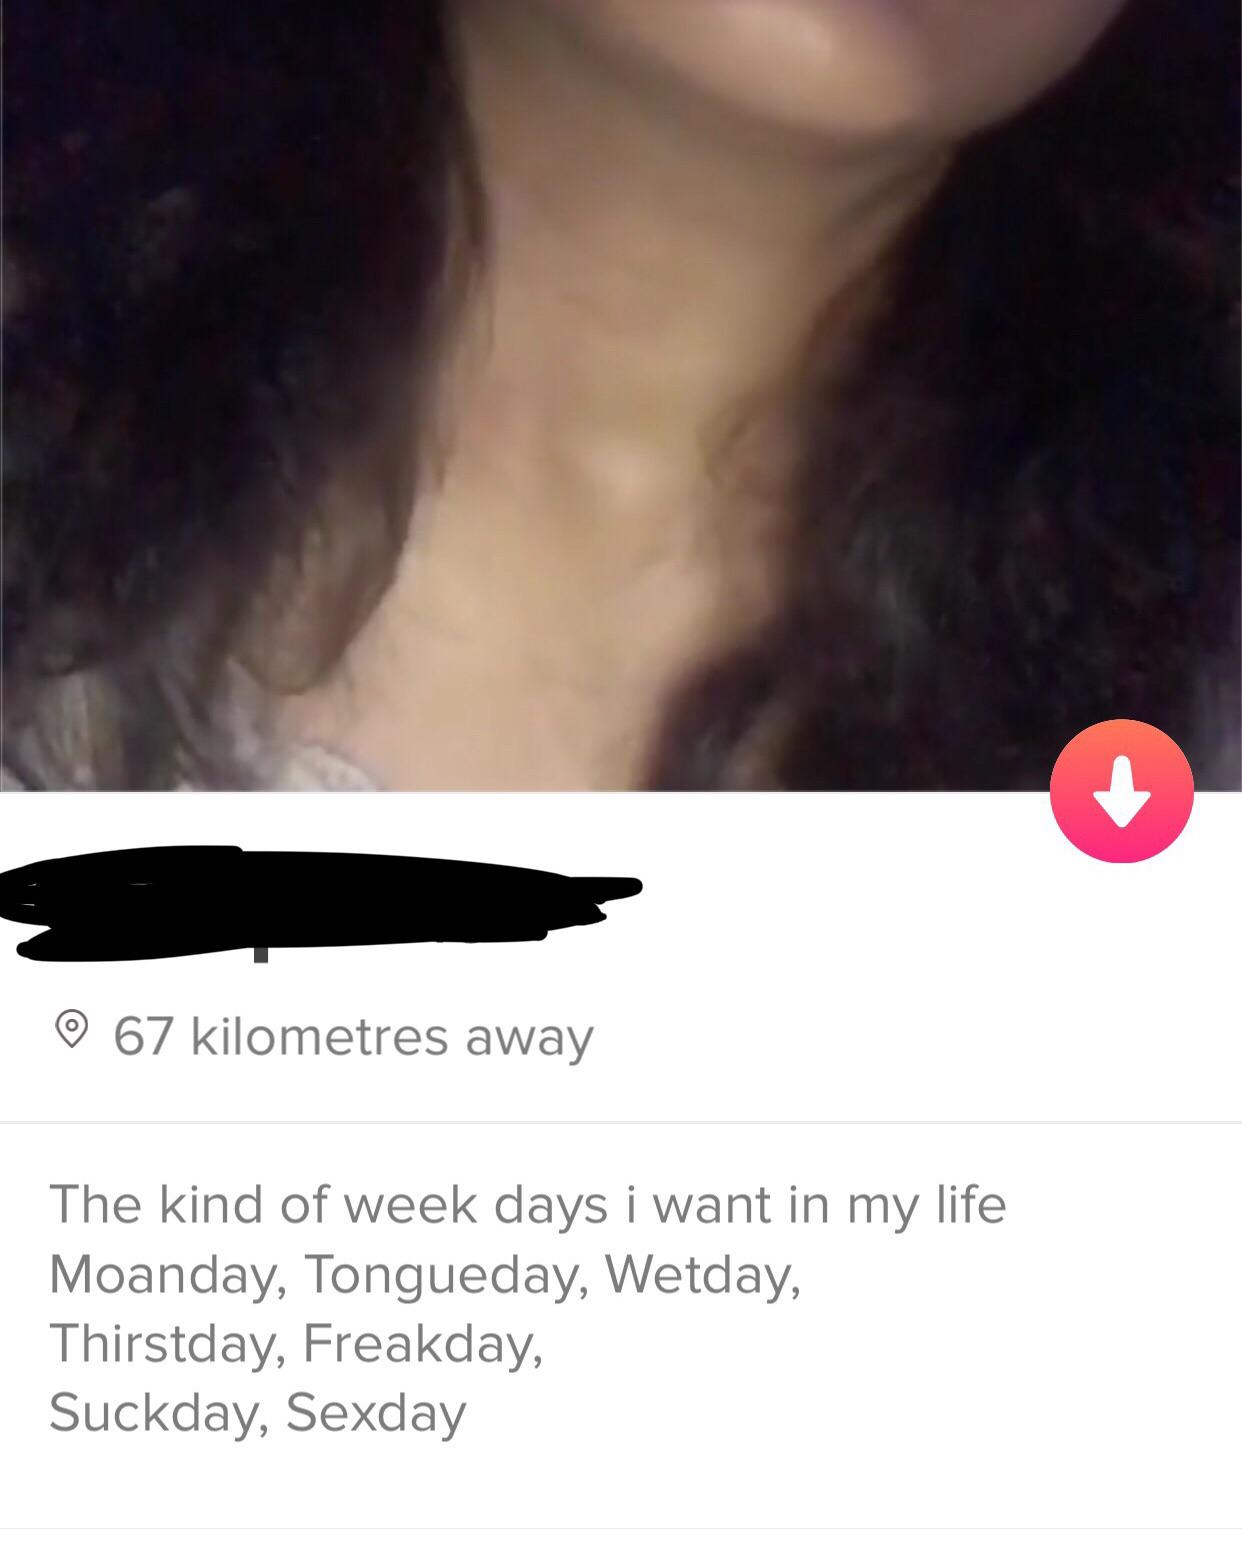 shameless tinder - The kind of week days i want in my life Moanday, Tongueday, Wetday, Thirstday, Freakday, Suckday, Sexday